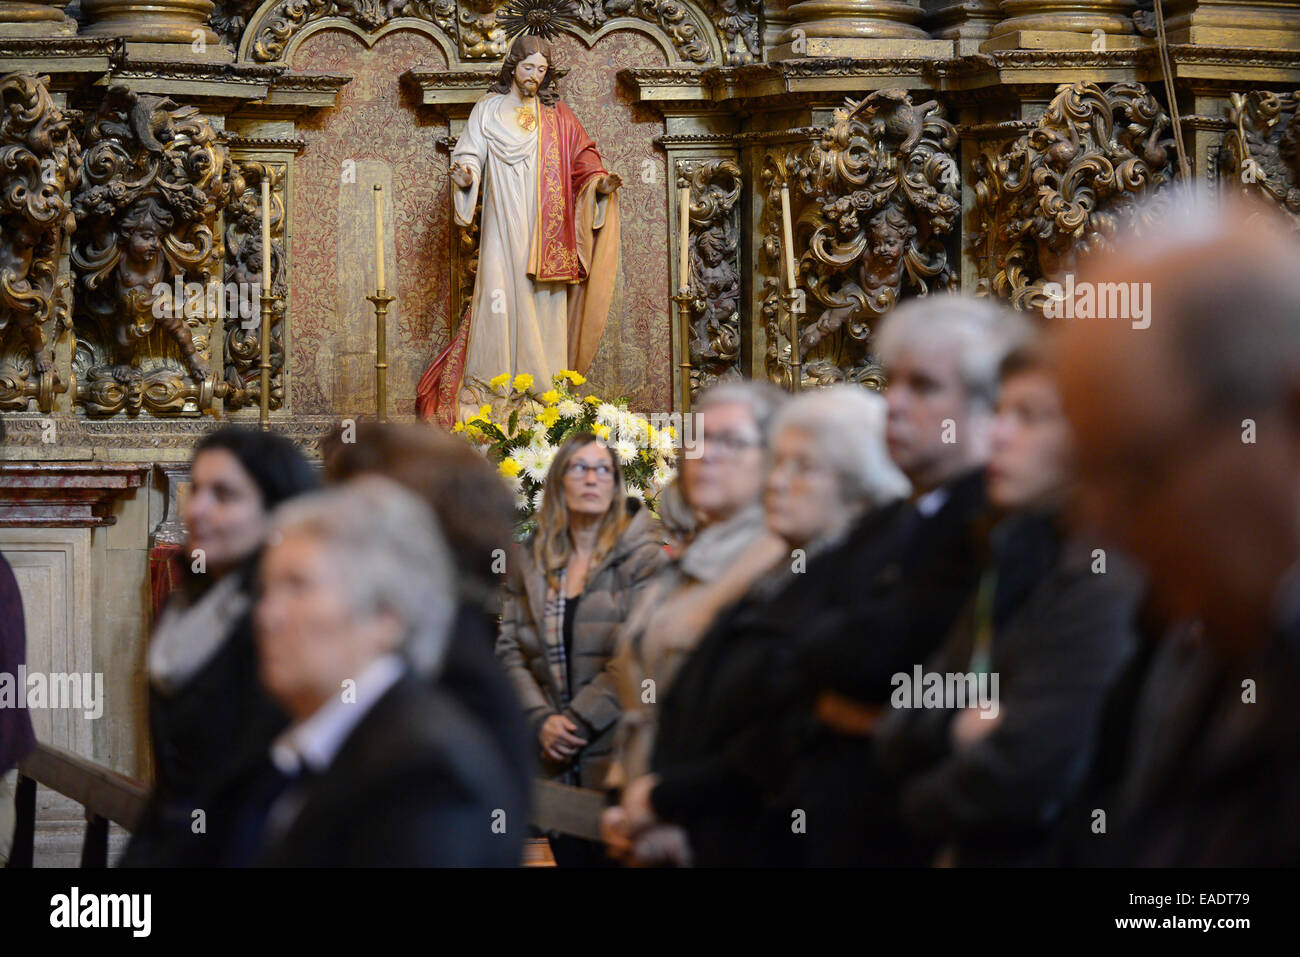 Statue of Jesus Christ above people during a catholic mass Stock Photo